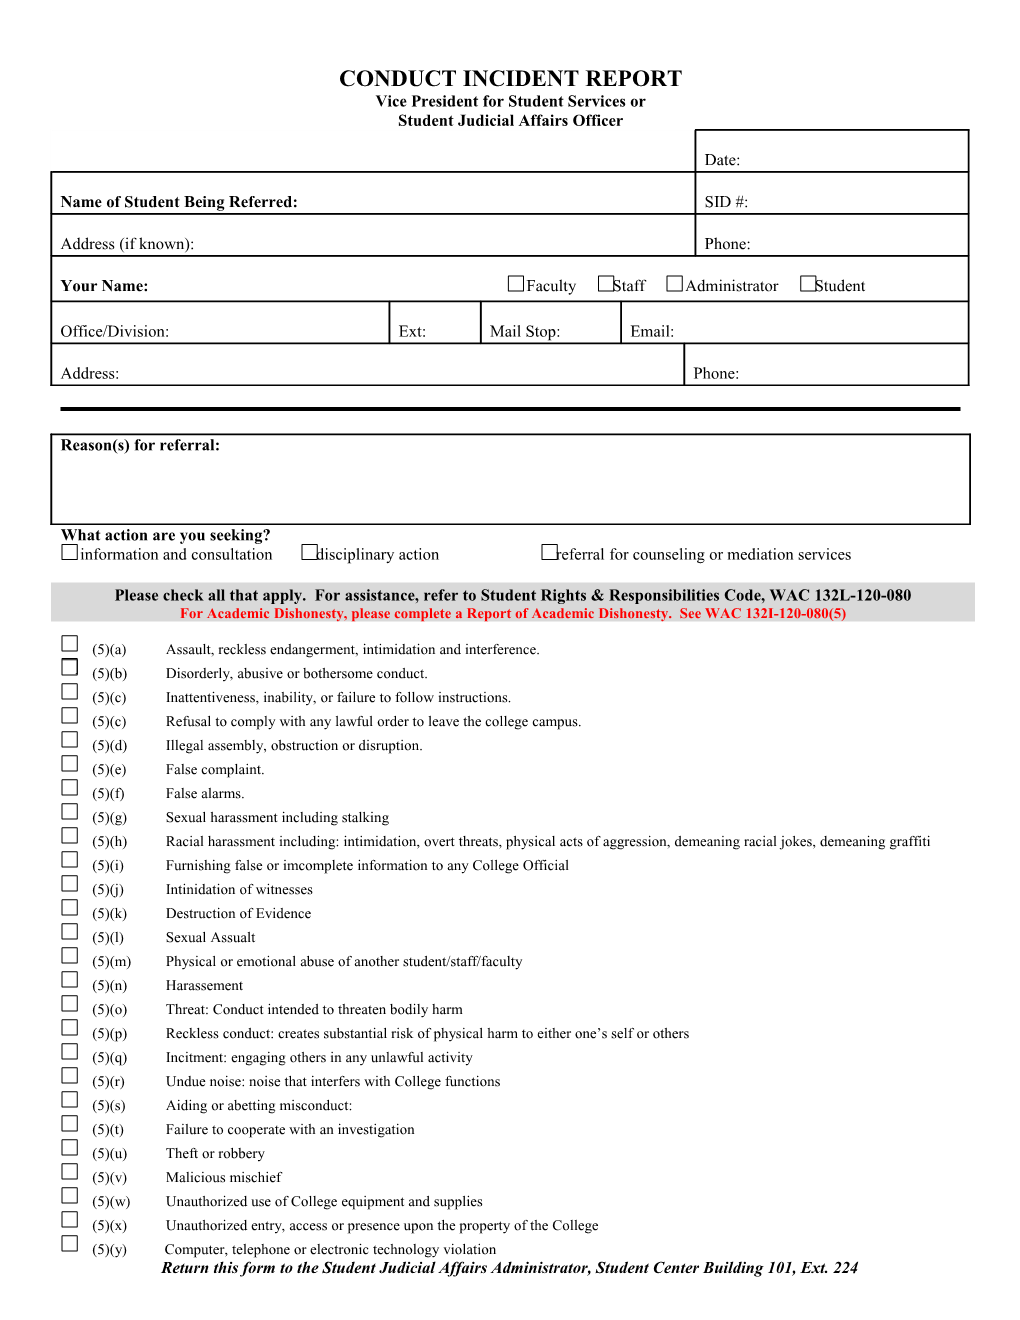 Student Conduct Incident Report